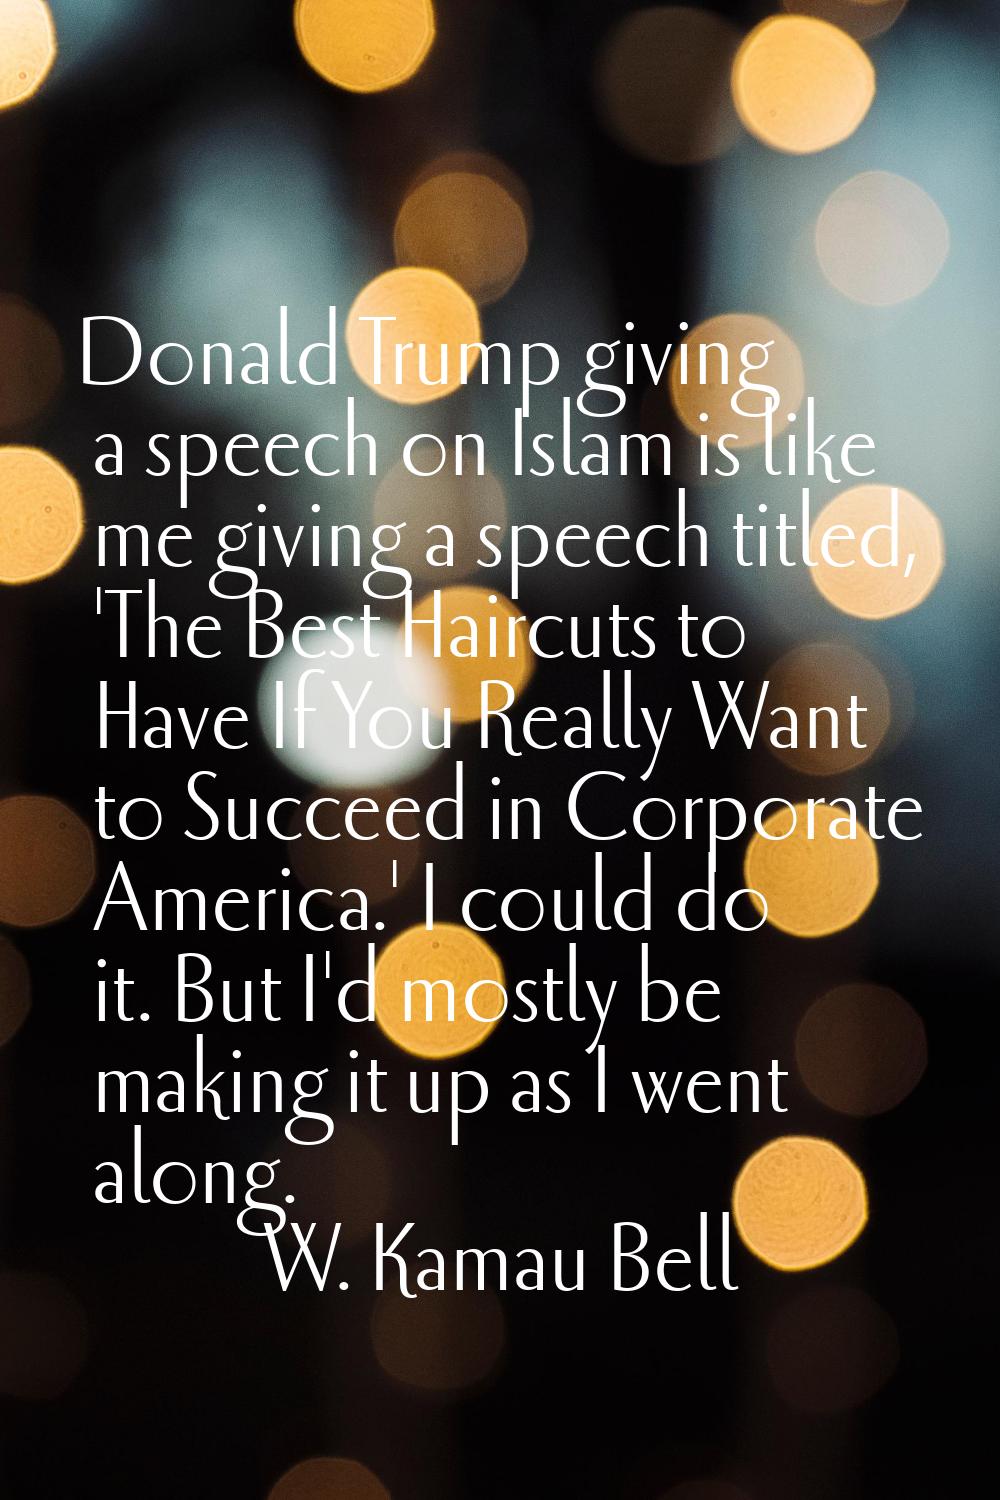 Donald Trump giving a speech on Islam is like me giving a speech titled, 'The Best Haircuts to Have